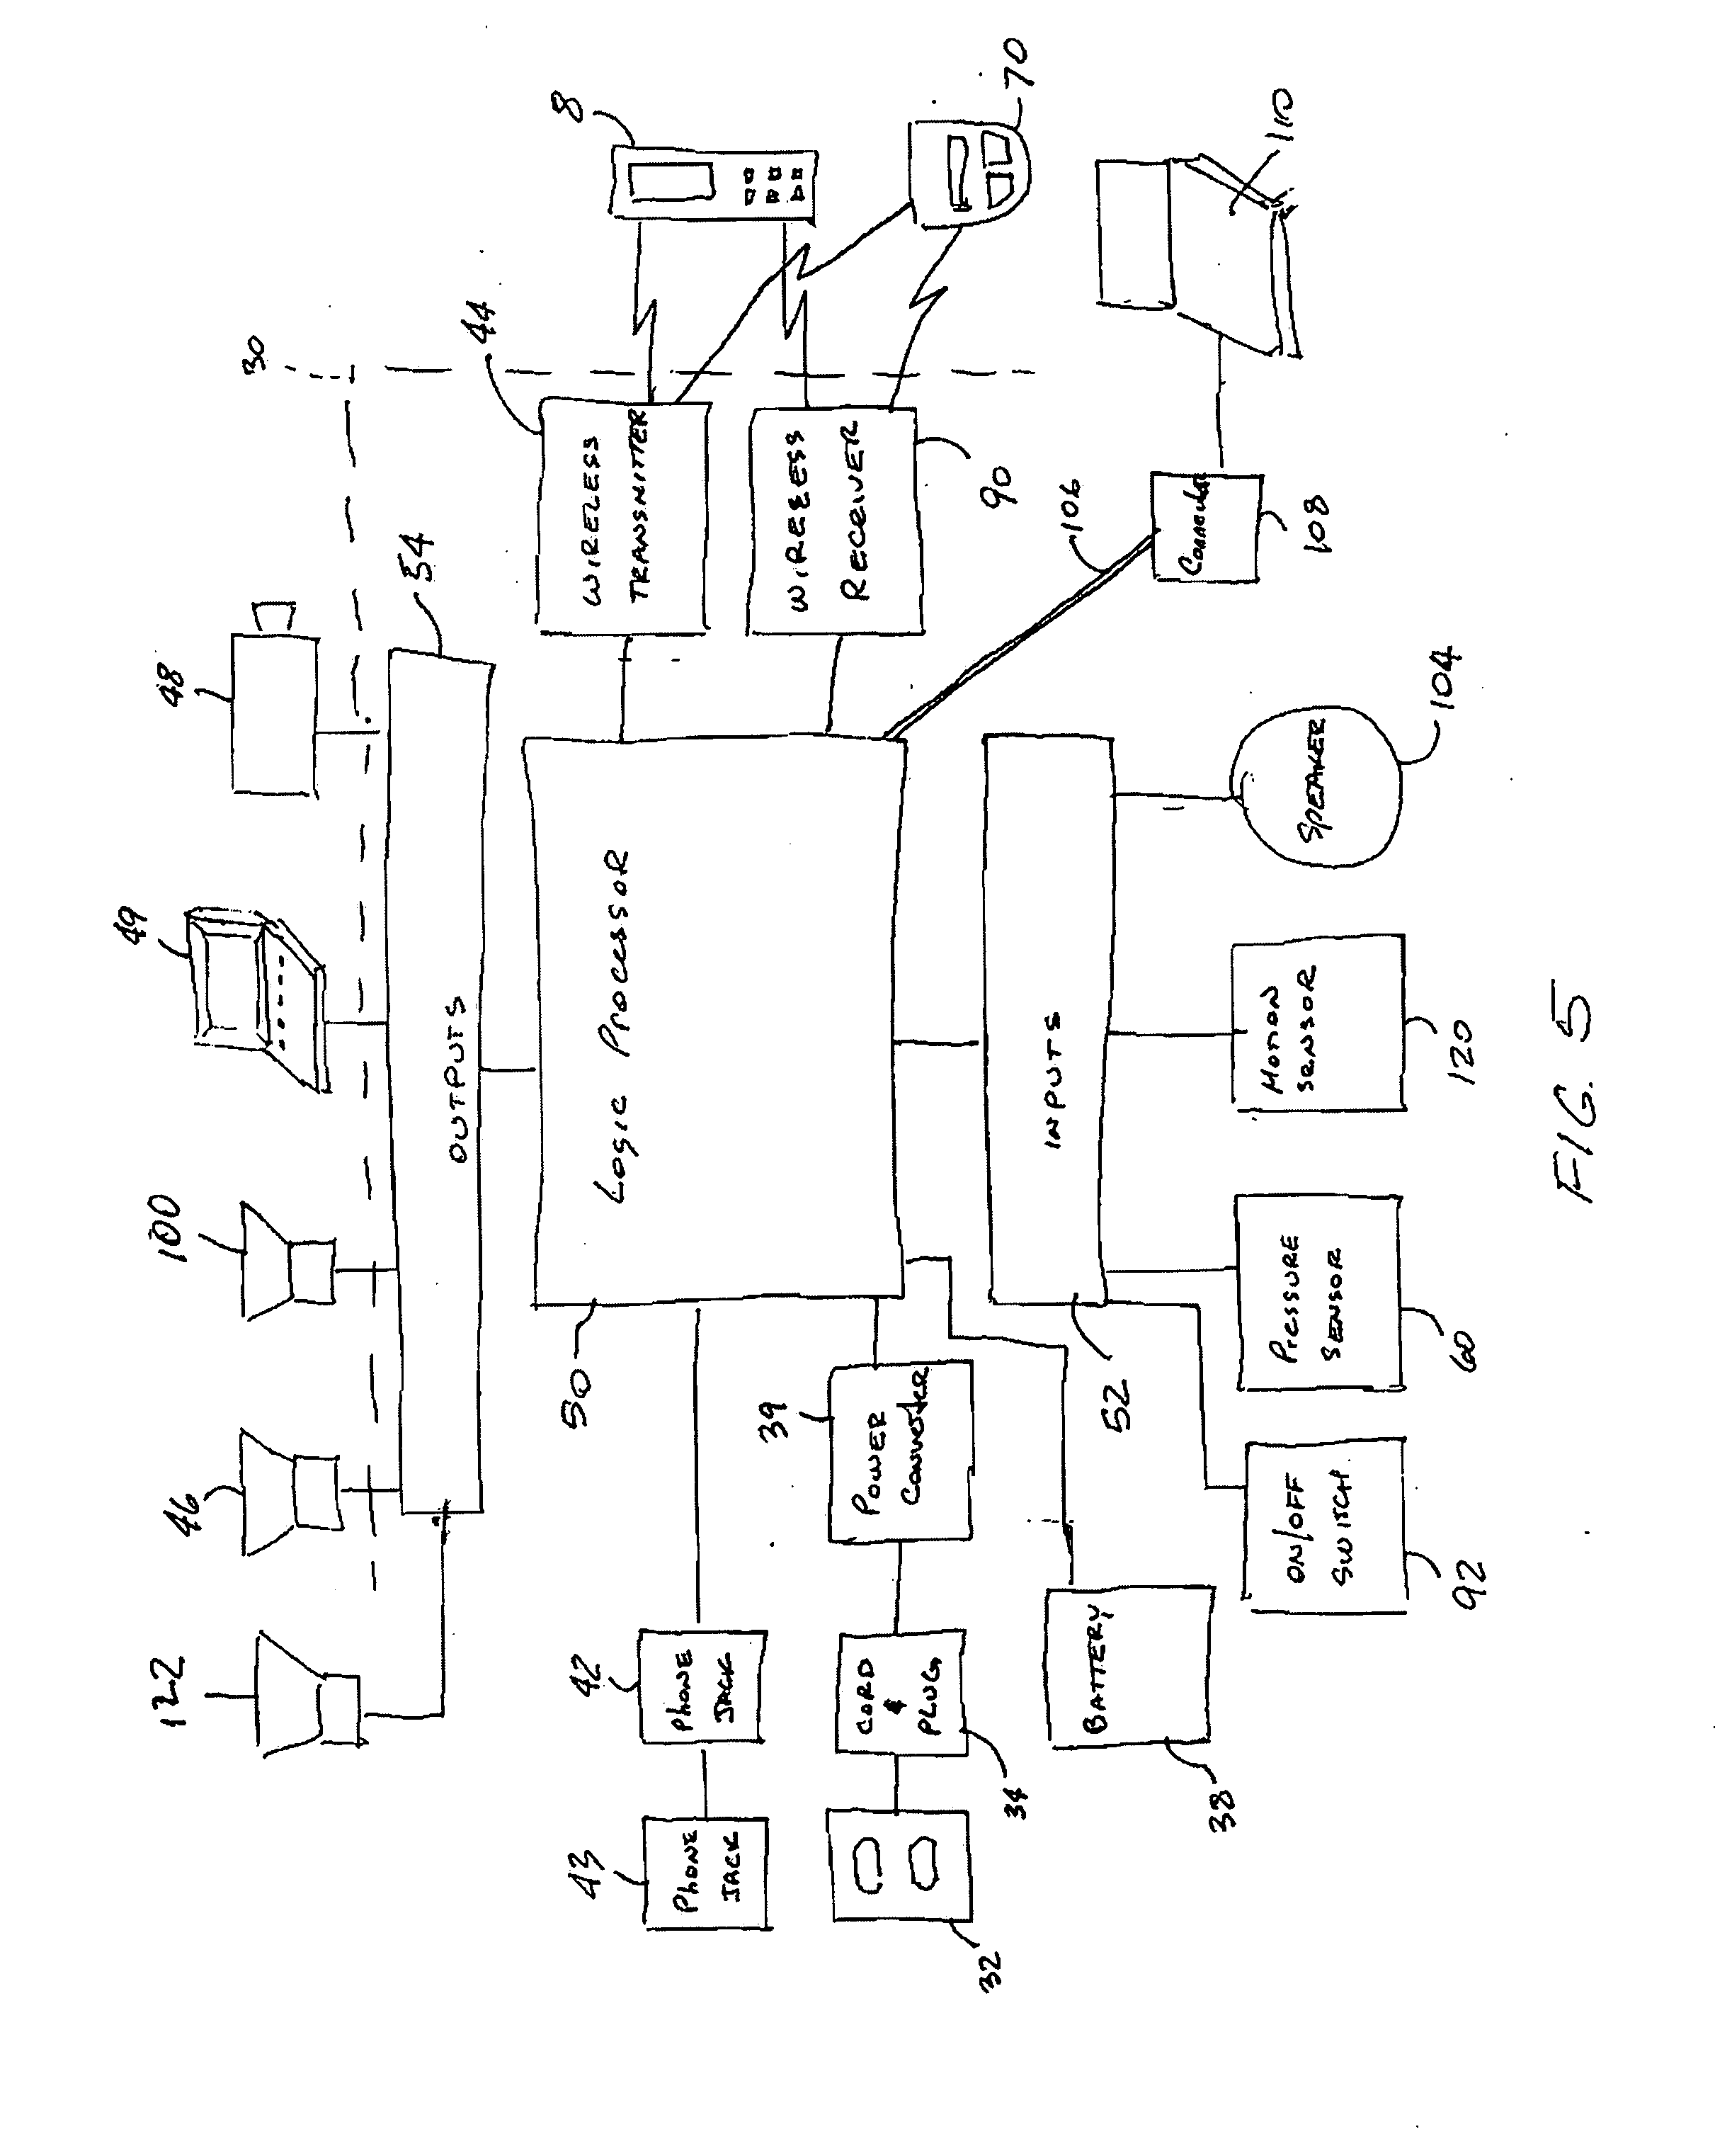 Portable security system and method thereof